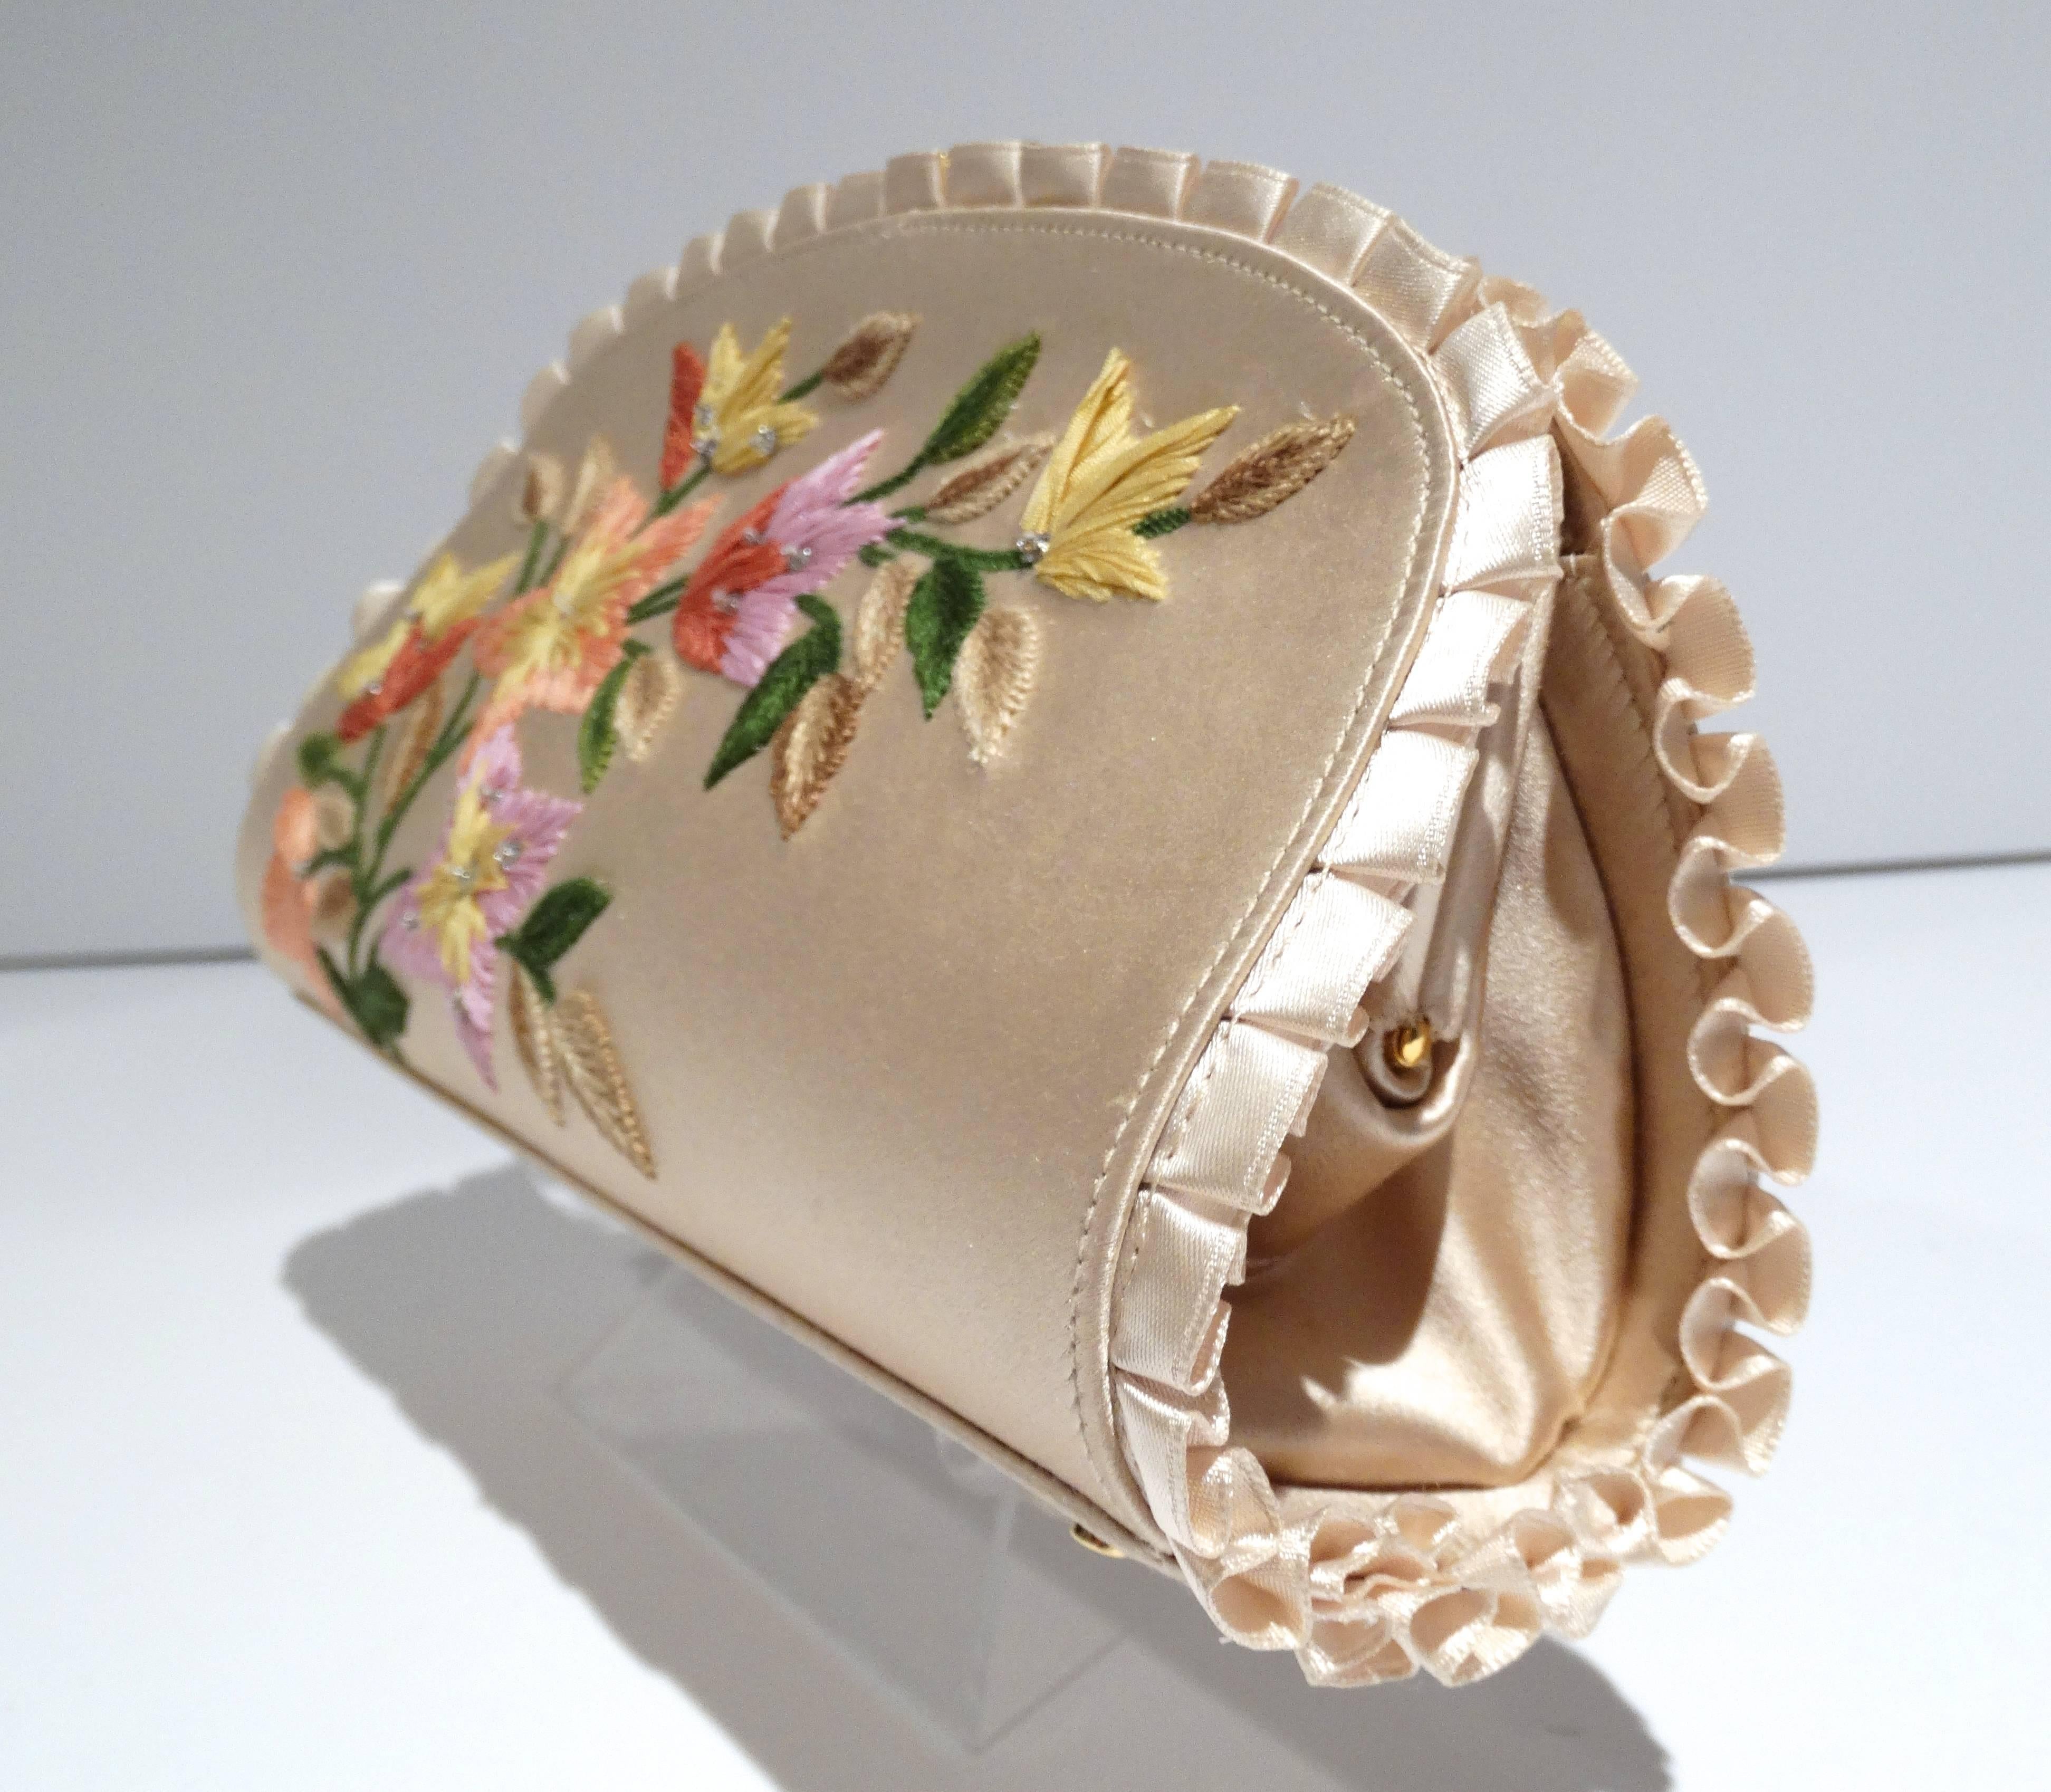 Exquisite Bohemian Judith Leiber original design clutch new with tags. This beautiful clutch features a wonderful floral embroidered detail. The superb champagne color silk is accented with a perfect knife ruffle pleat along the edges. The purse